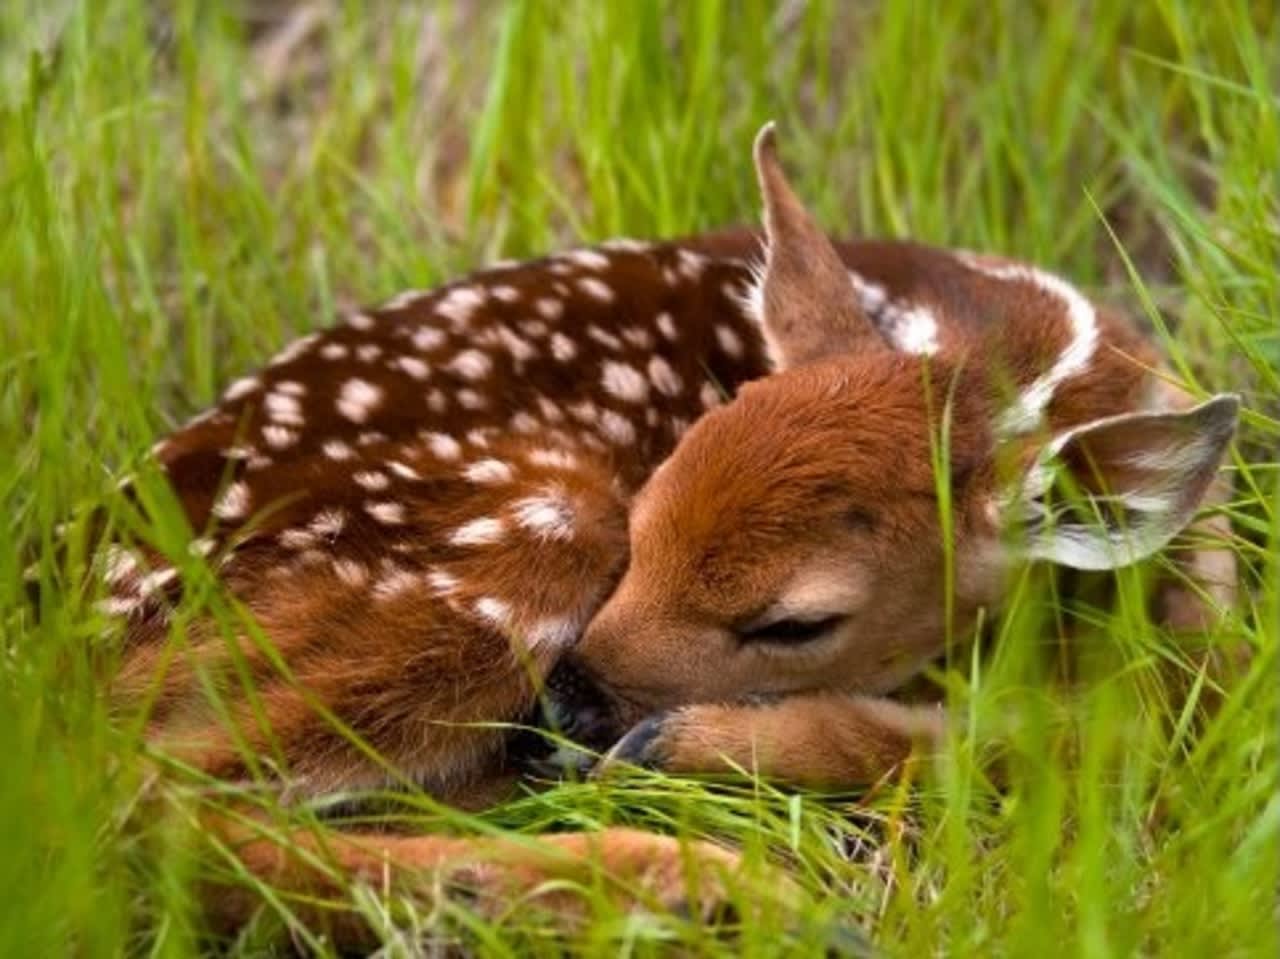 Unless obviously ill, injured, or in danger, fawns should never be touched or moved from their hiding spots, say wildlife experts. North Castle police responded last week to two calls from folks concerned about the tiny critters.